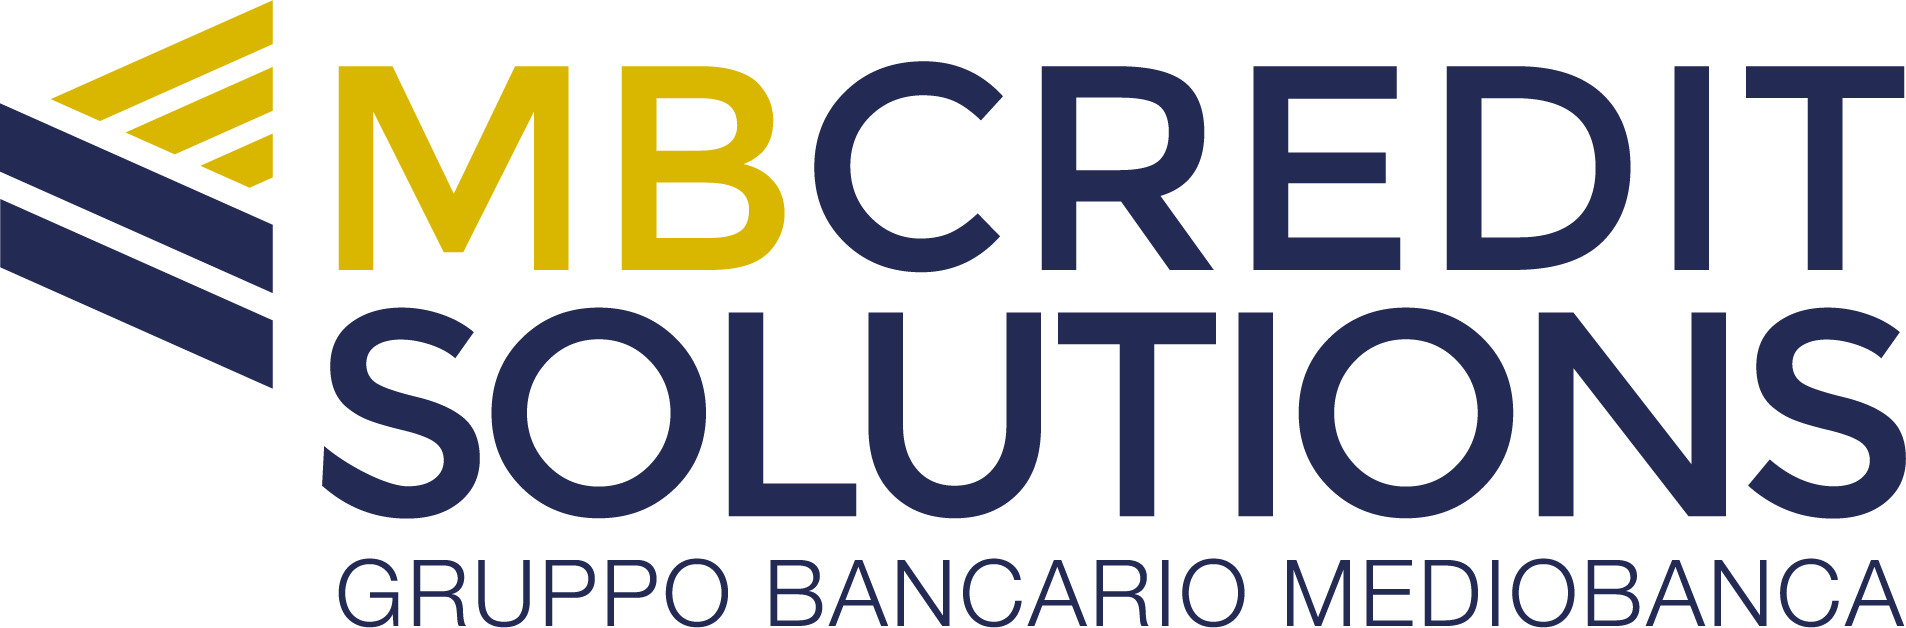 MBCredit Solutions